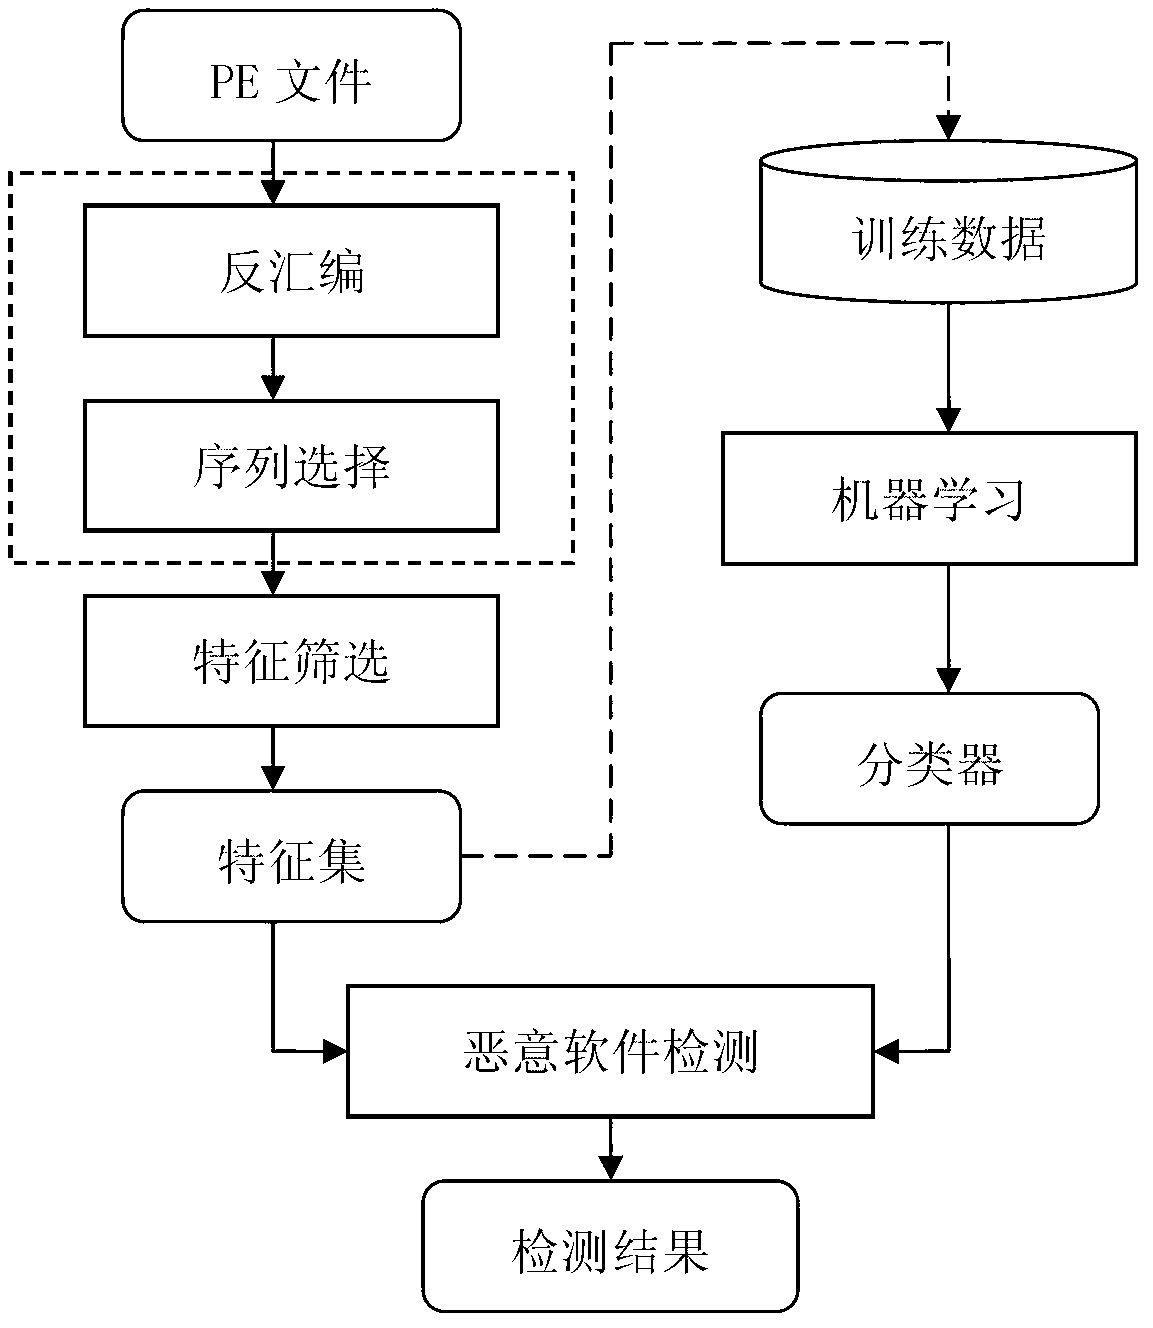 Computer malicious software detection novel method based on software control flow features